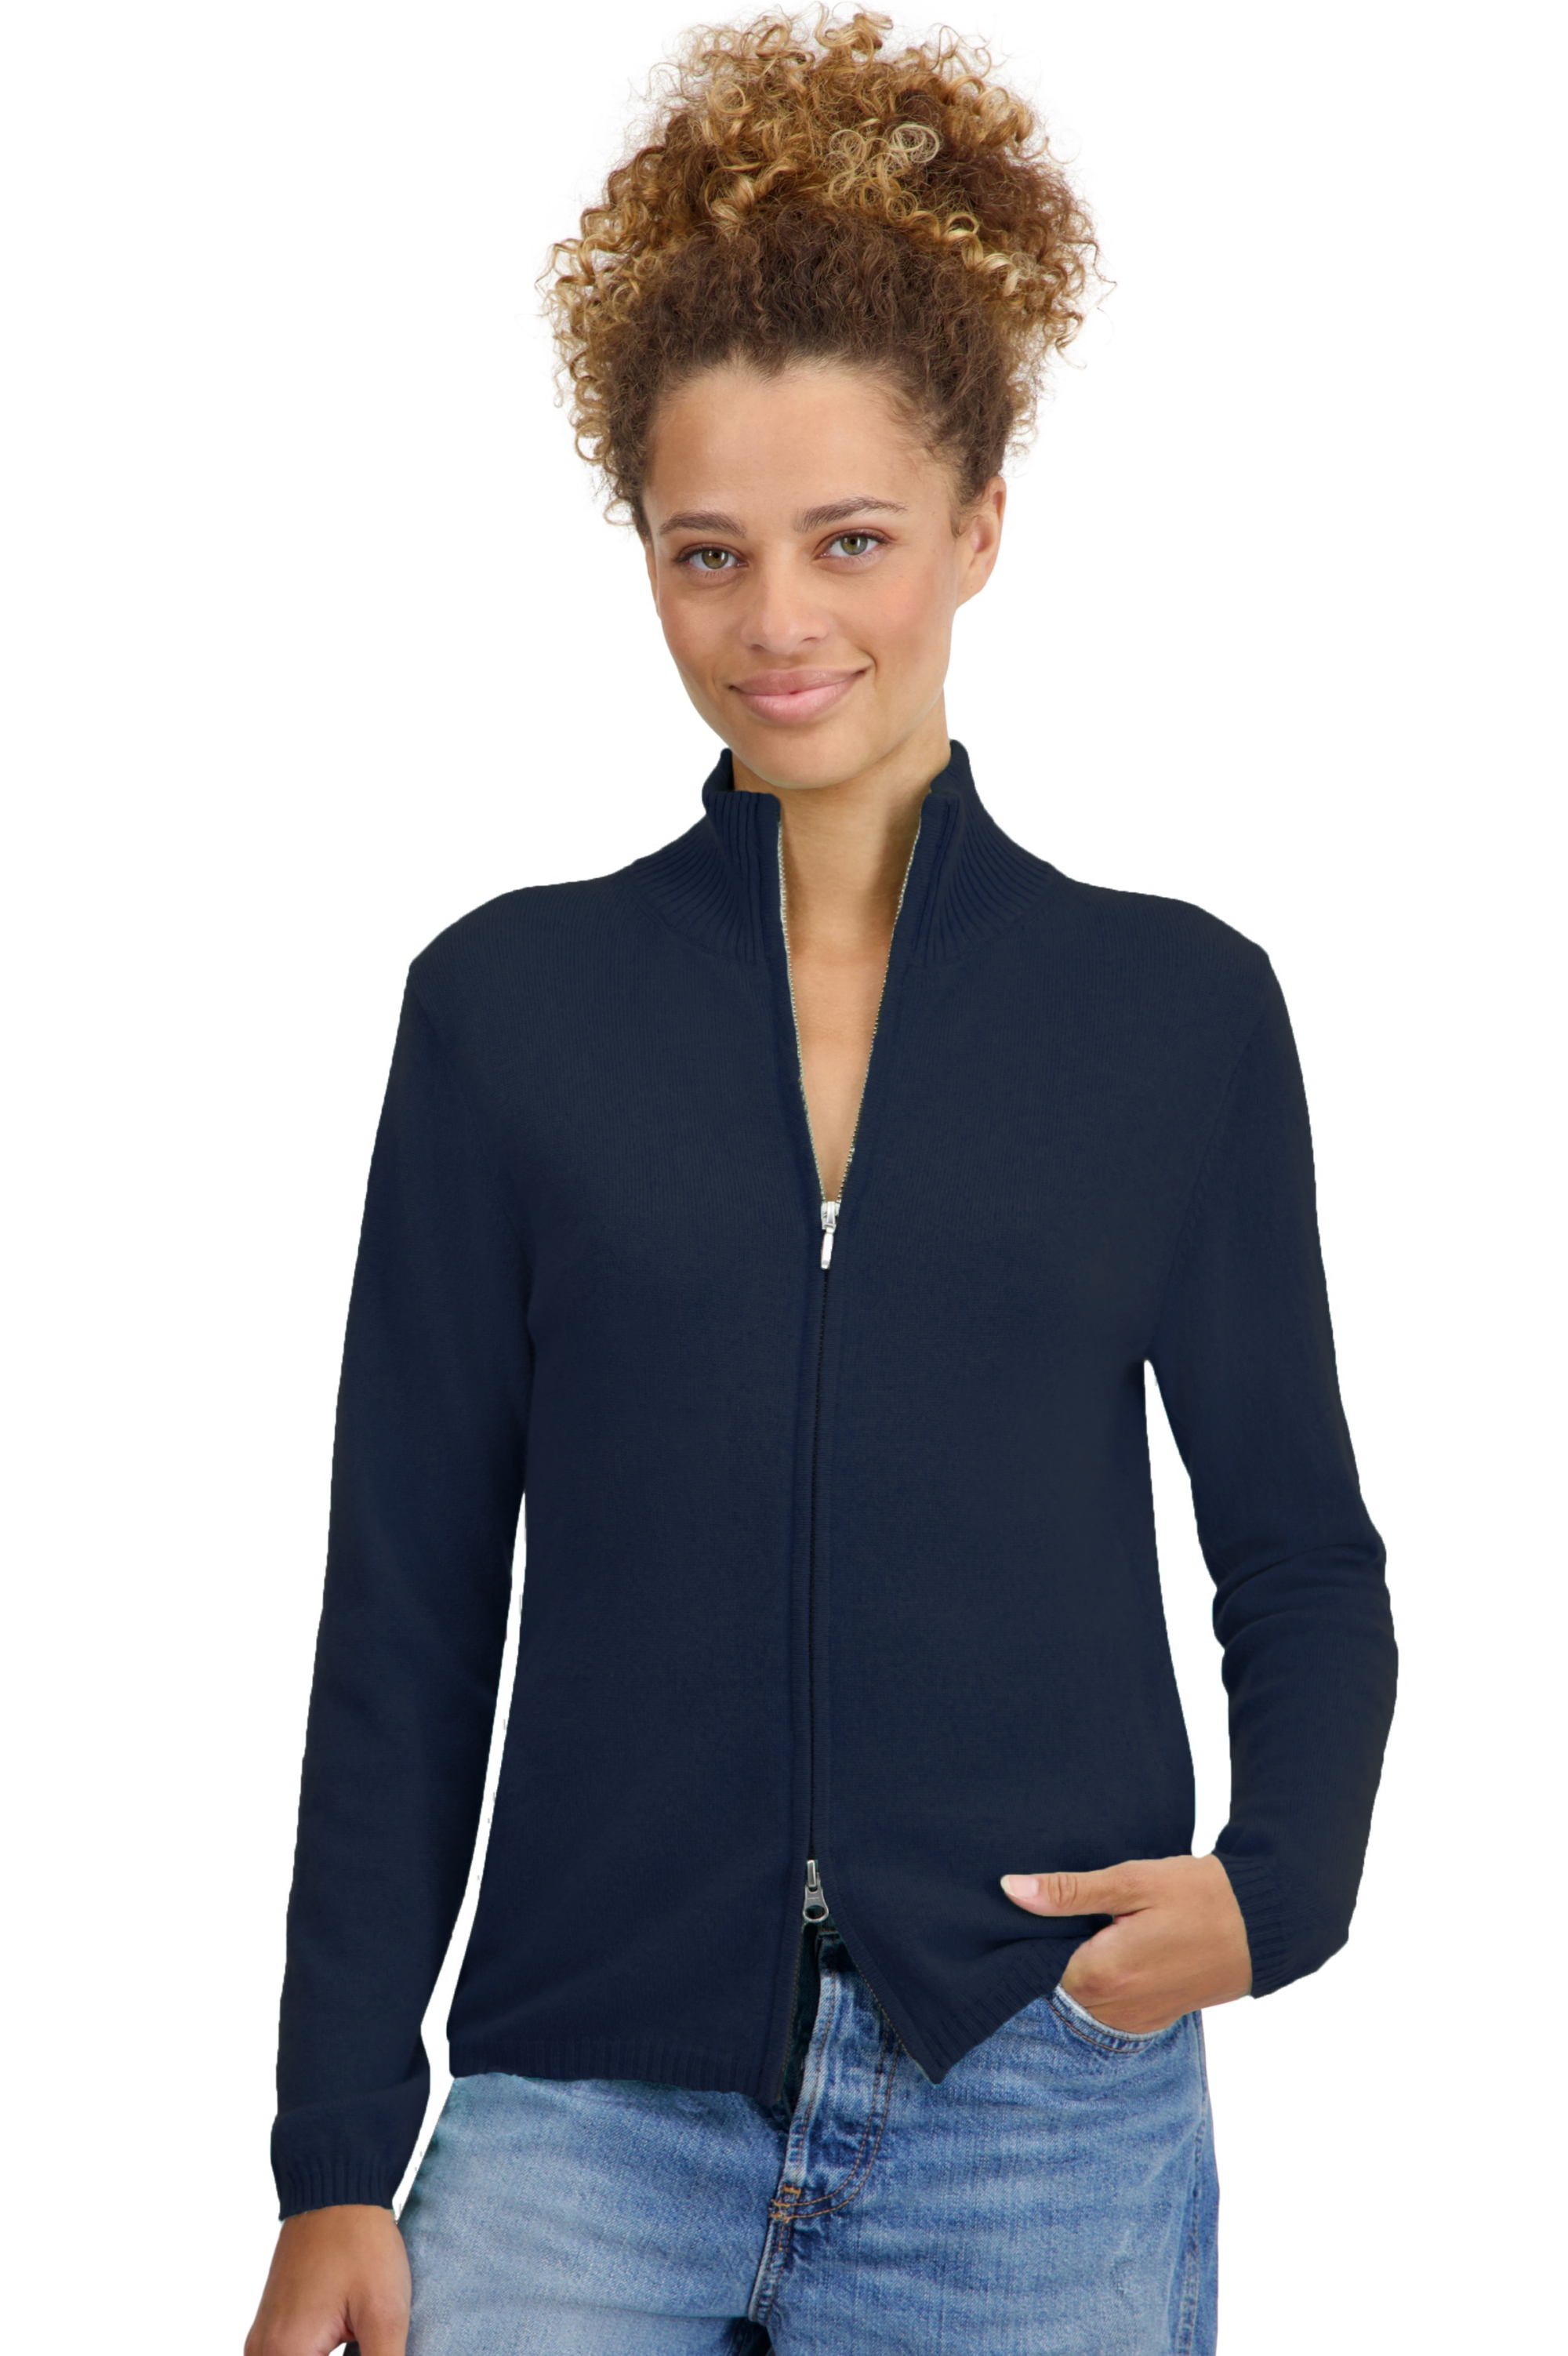 Cashmere ladies basic sweaters at low prices thames first dress blue m